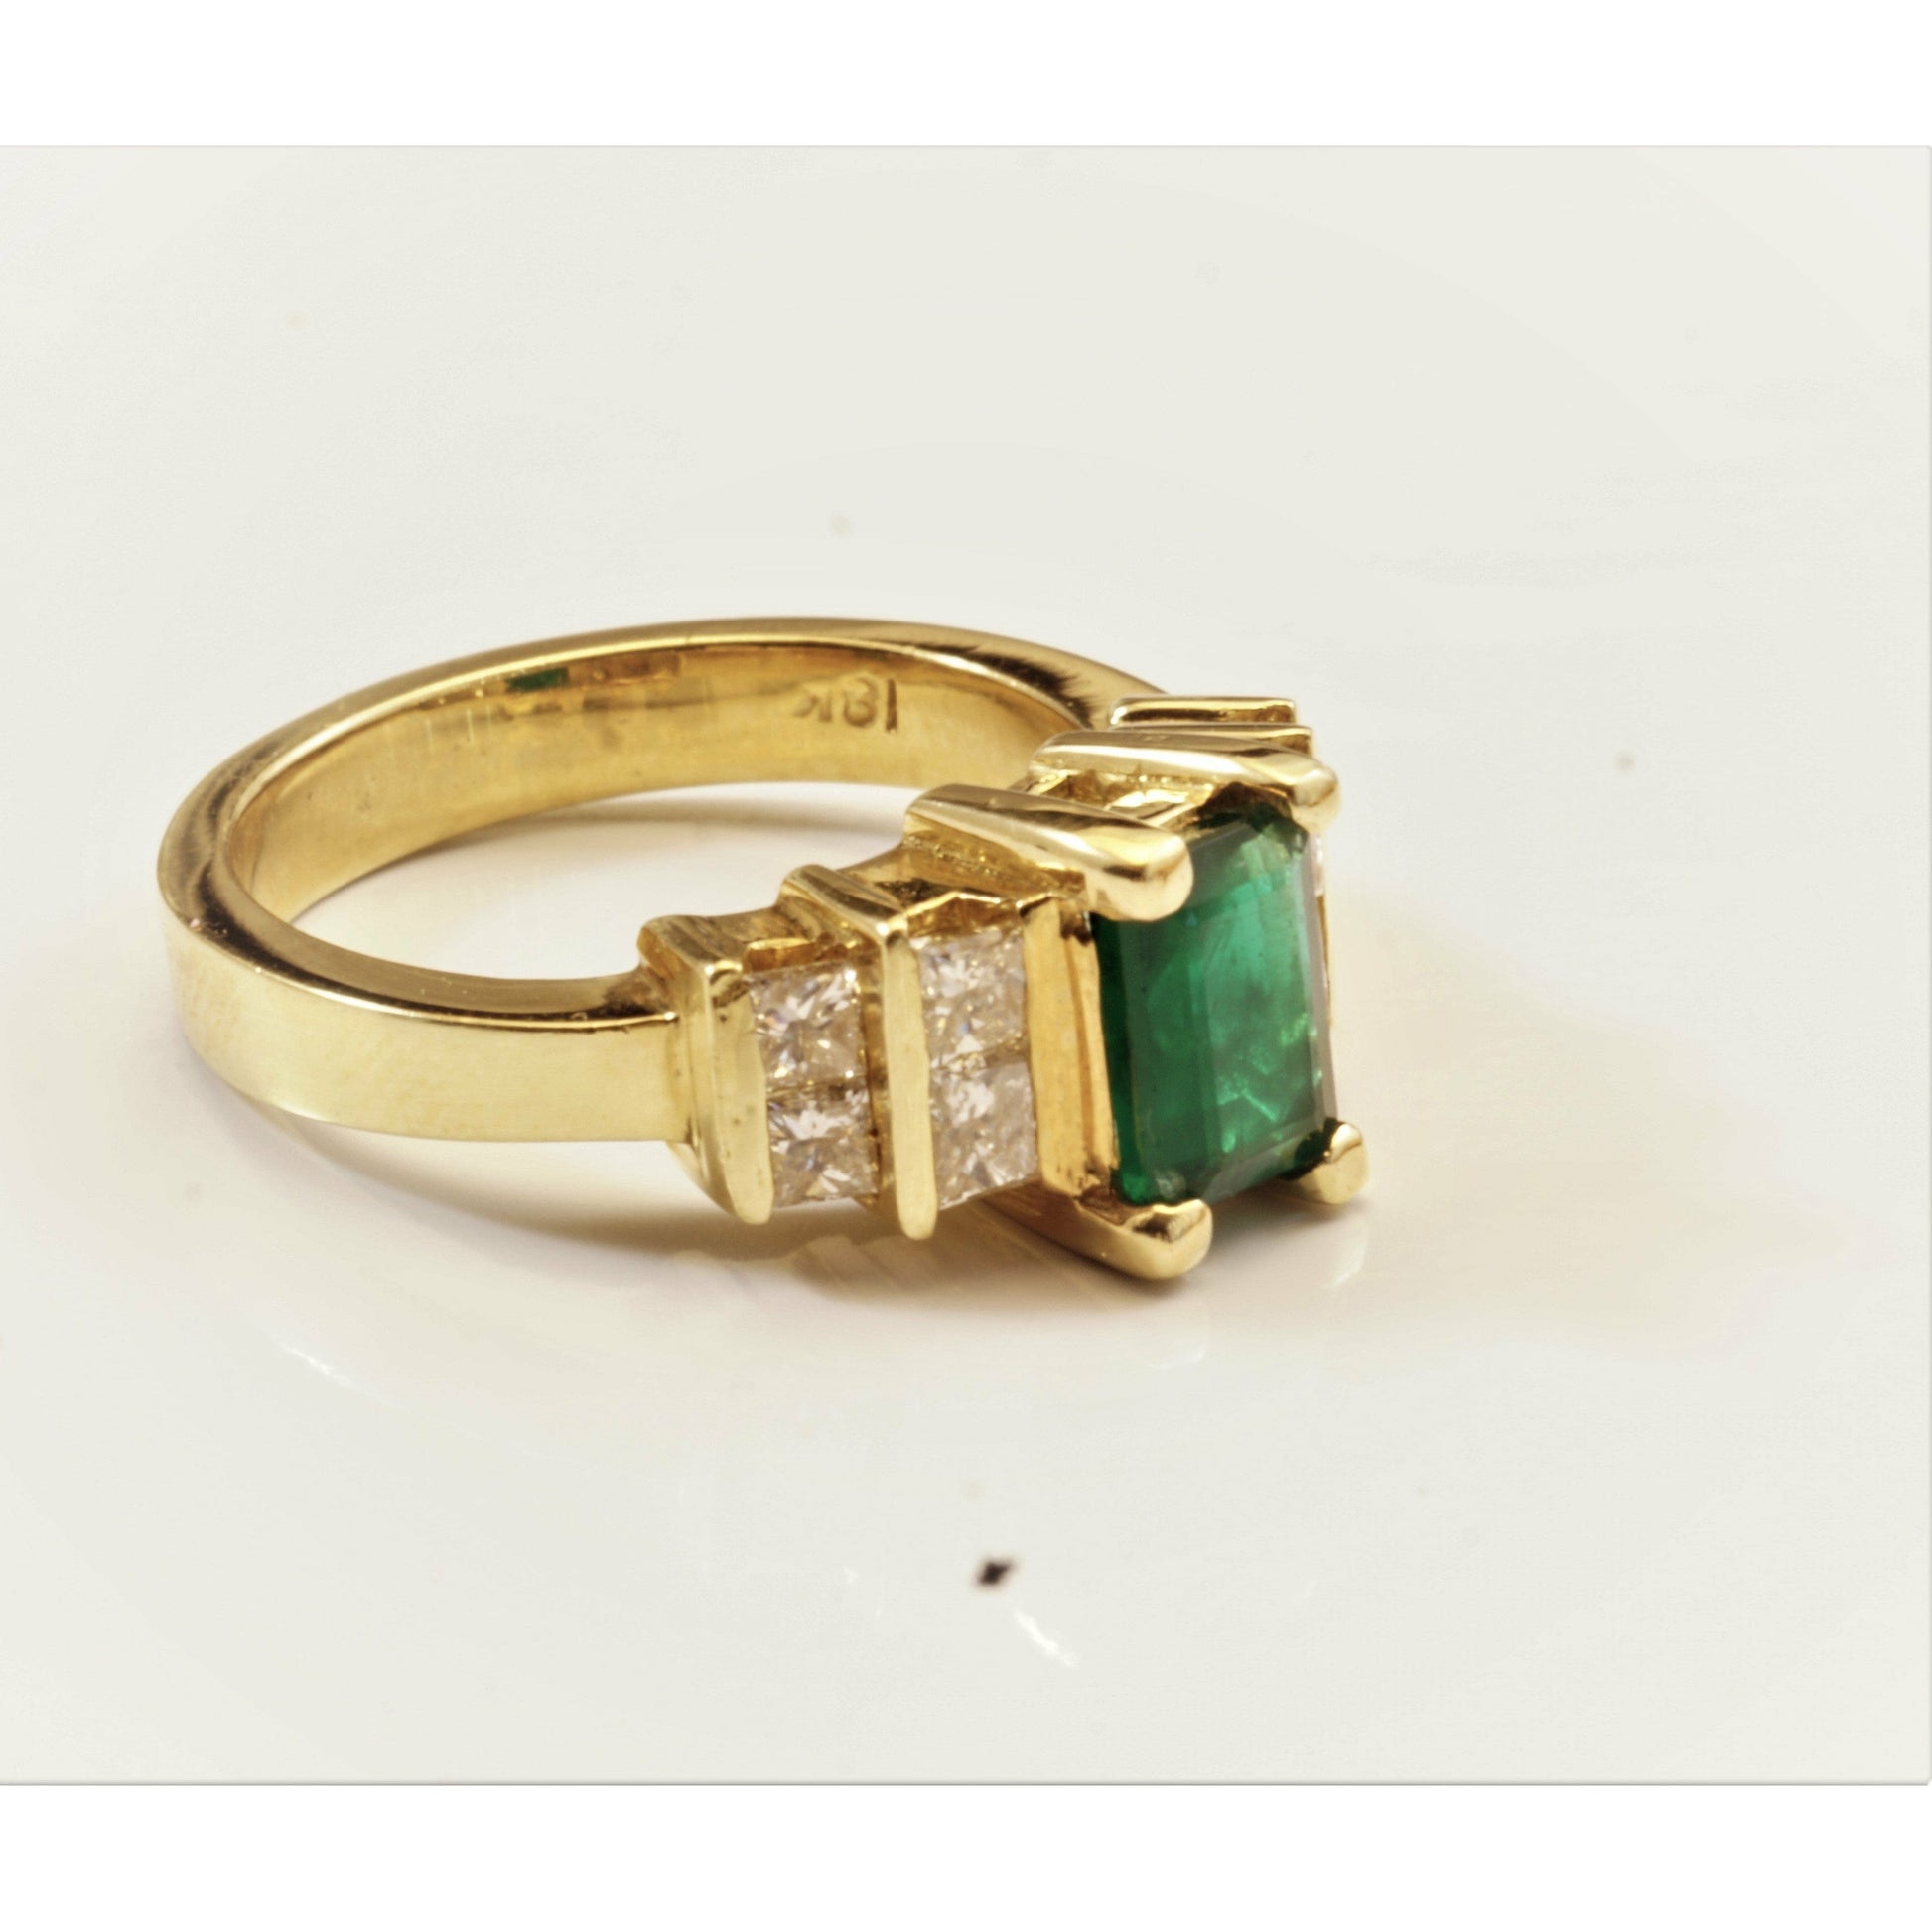 FJL Jewelry Gemstone Ring Sold_Emerald cut Emerald with Princess Diamond Ring in 18K Yellow Gold- Eight Channel-set diamond